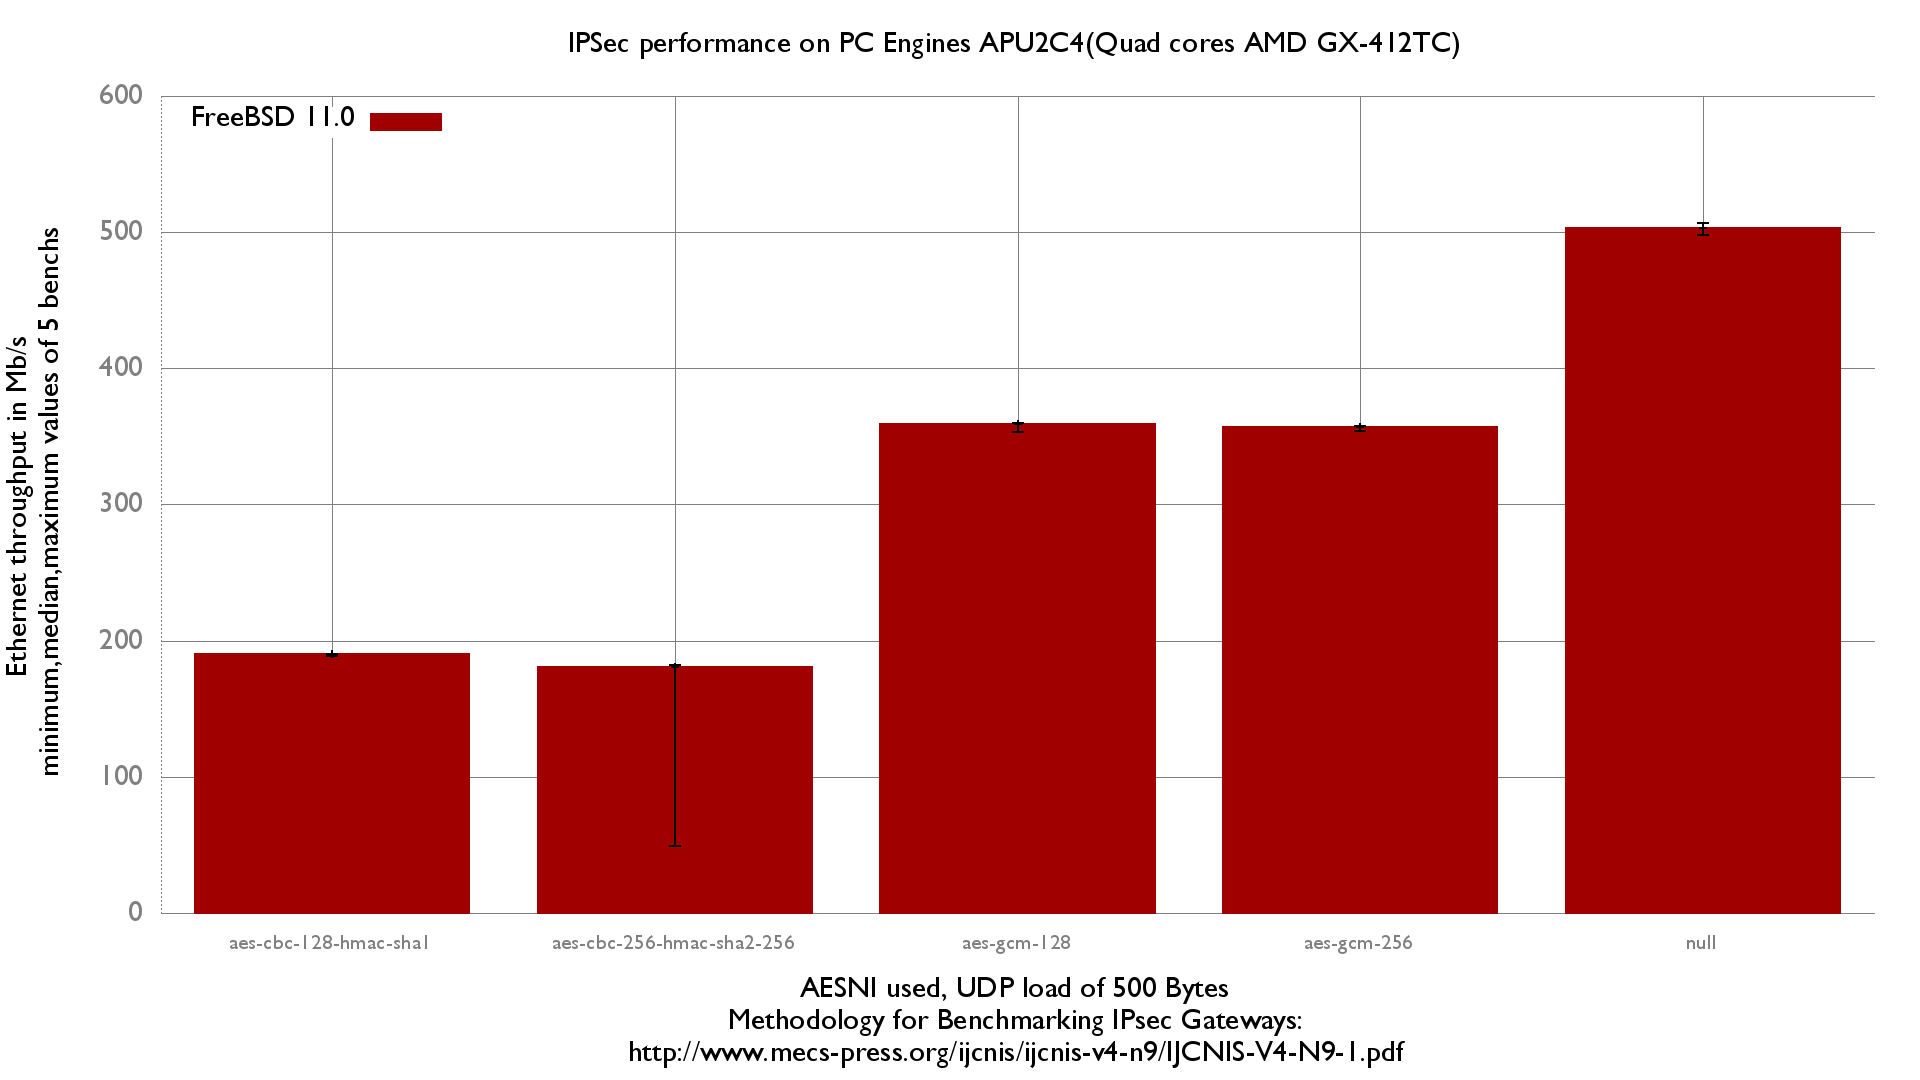 IPSec  throughput with a PC Engines APU2C2 running FreeBSD 11.0